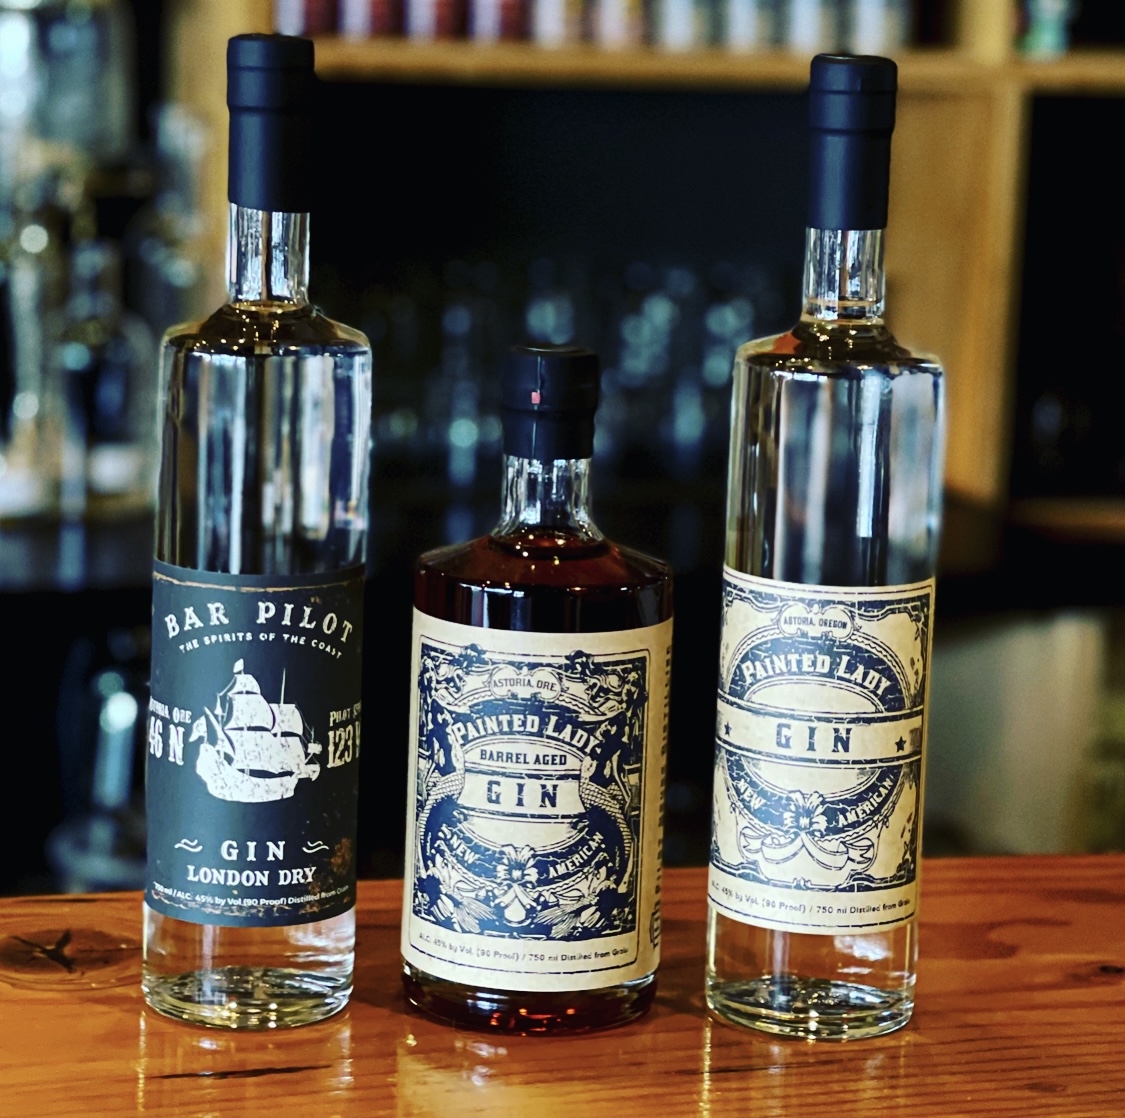 Larry Cary Pilot House Distilling – Culinary Treasure Podcast Episode 84 by Steven Shomler 